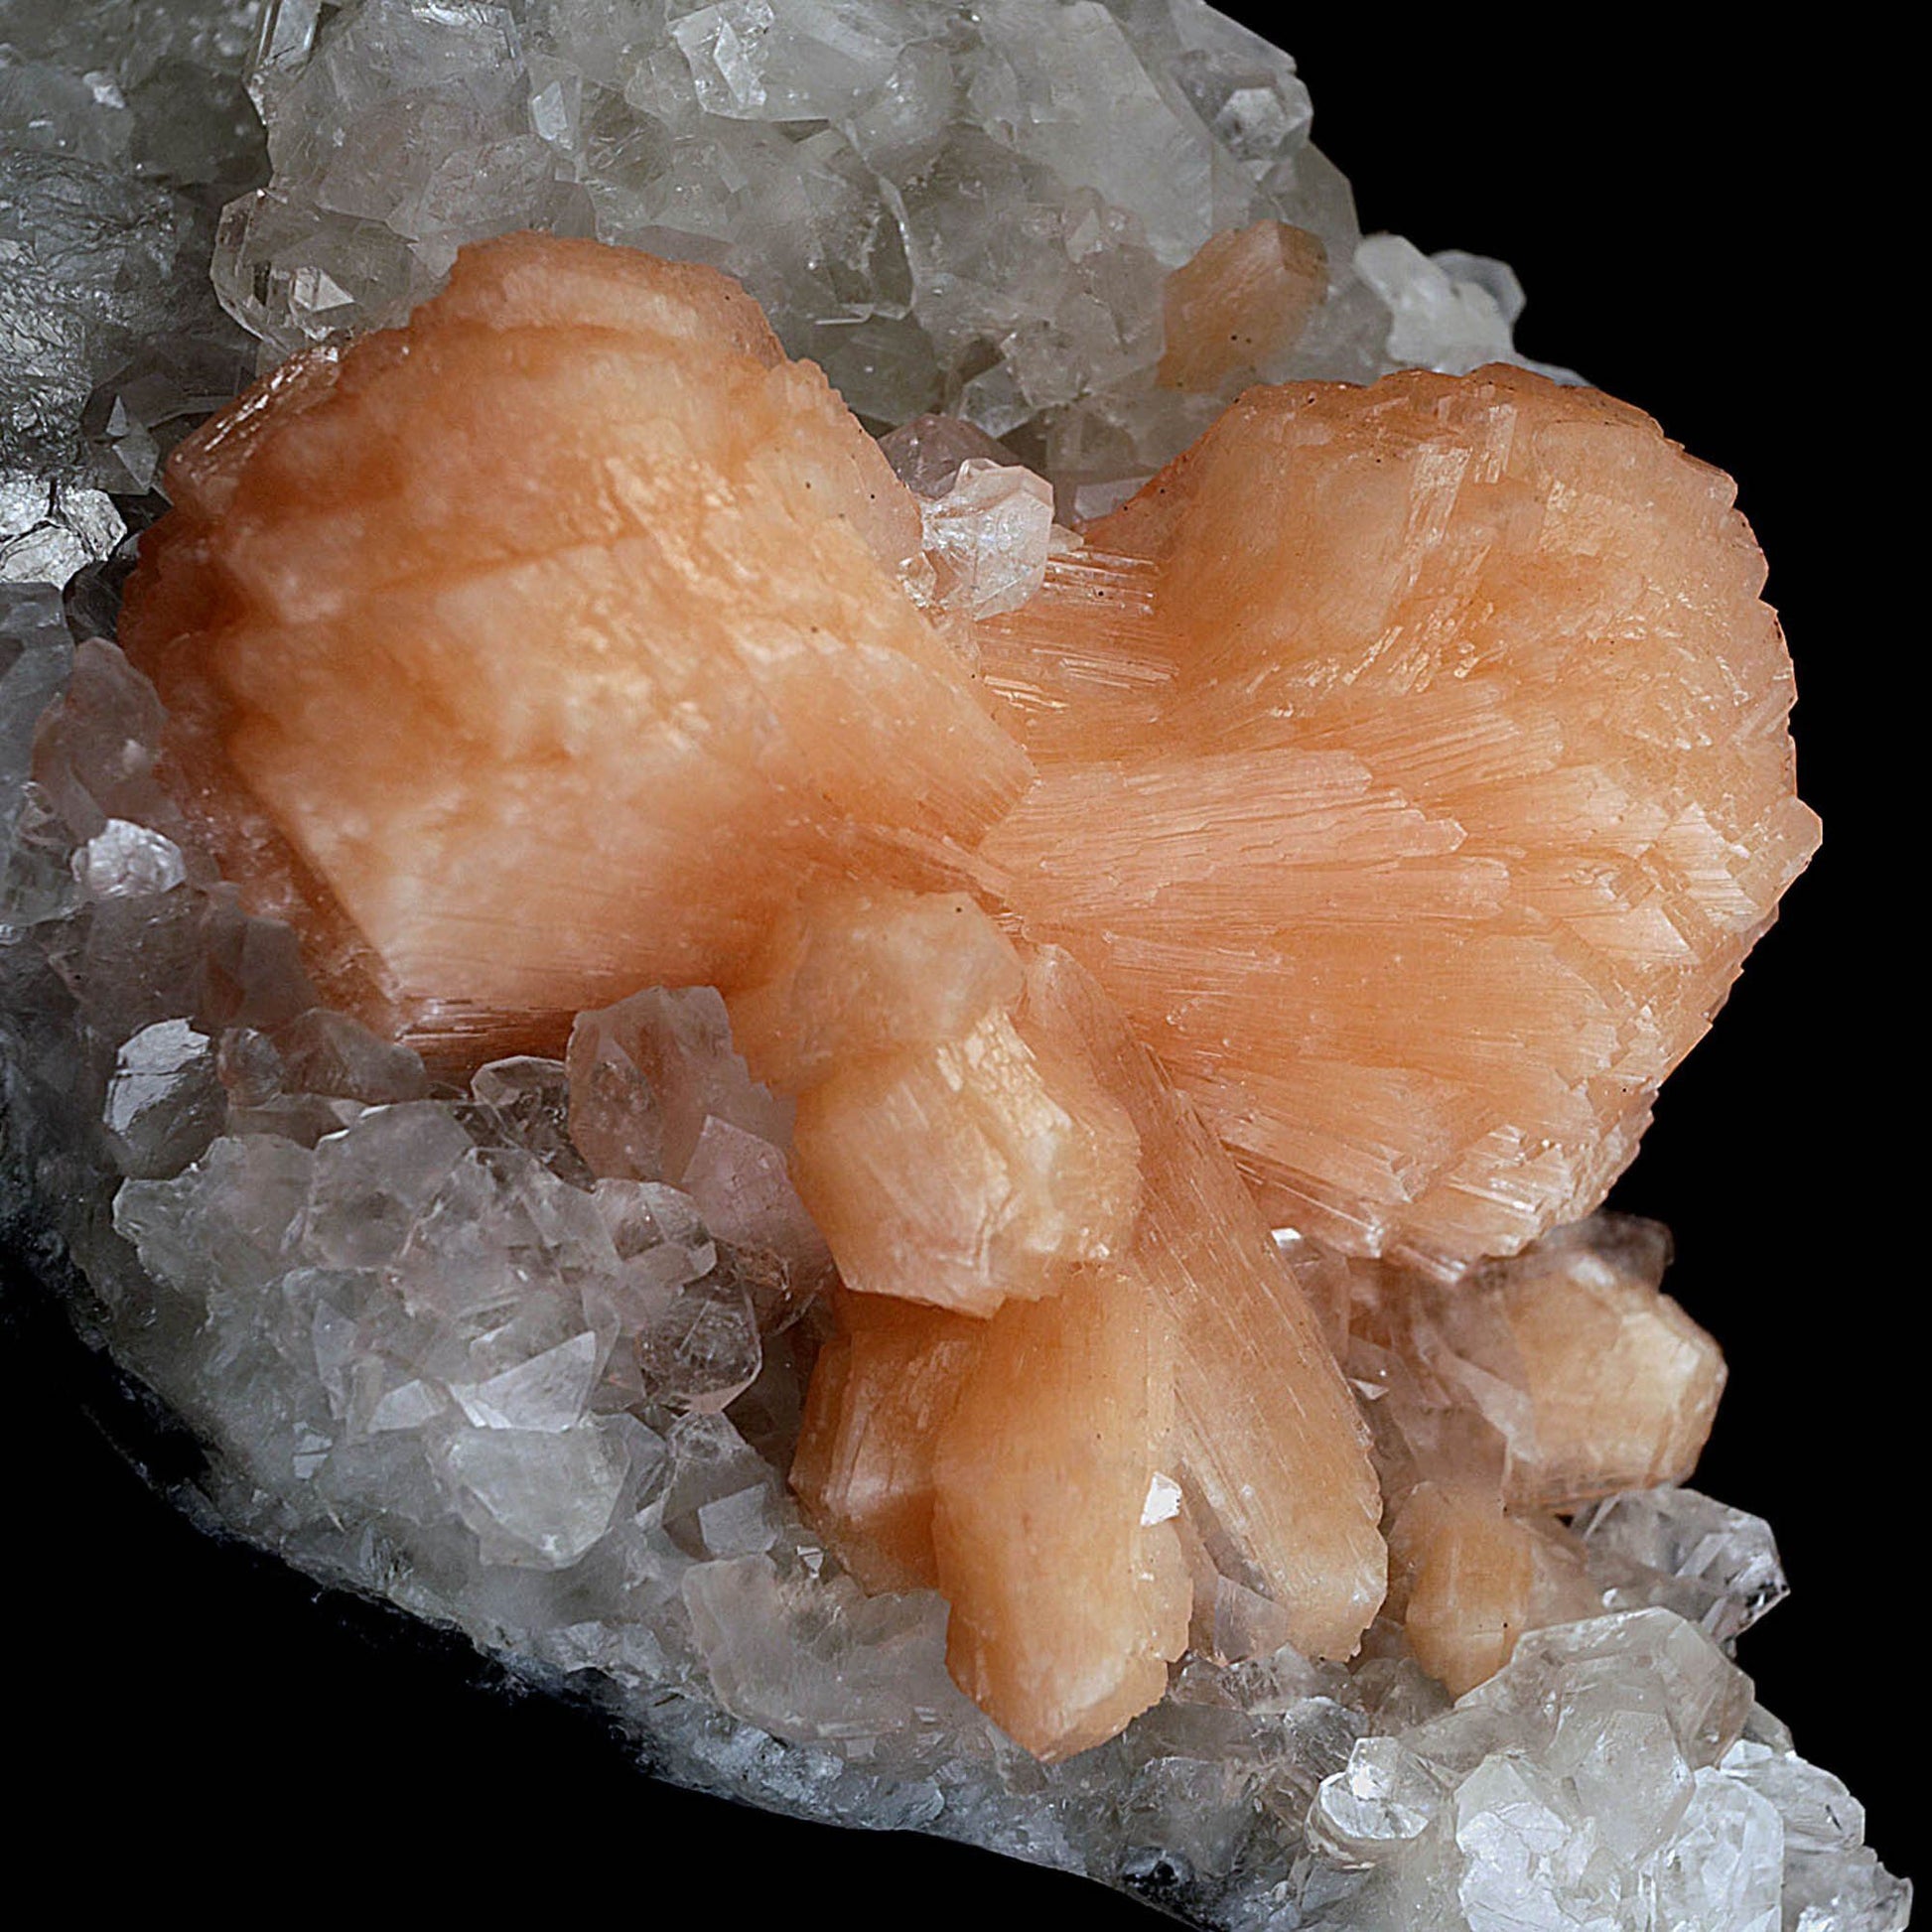 Stilbite Bow Shape on Gemmy Apophyllite Natural Mineral Specimen # B 4…  https://www.superbminerals.us/products/stilbite-bow-shape-on-gemmy-apophyllite-natural-mineral-specimen-b-4080  Features:Classic combination specimen from the basalt trap rock quarries of India featuring a Fluorapophyllite crystal cluster with a Stilbite bowtie! While common in general, this is really a special piece - more beautiful and sparkly than most. The Fluorapophyllite is glassy, transparent to translucent and composed